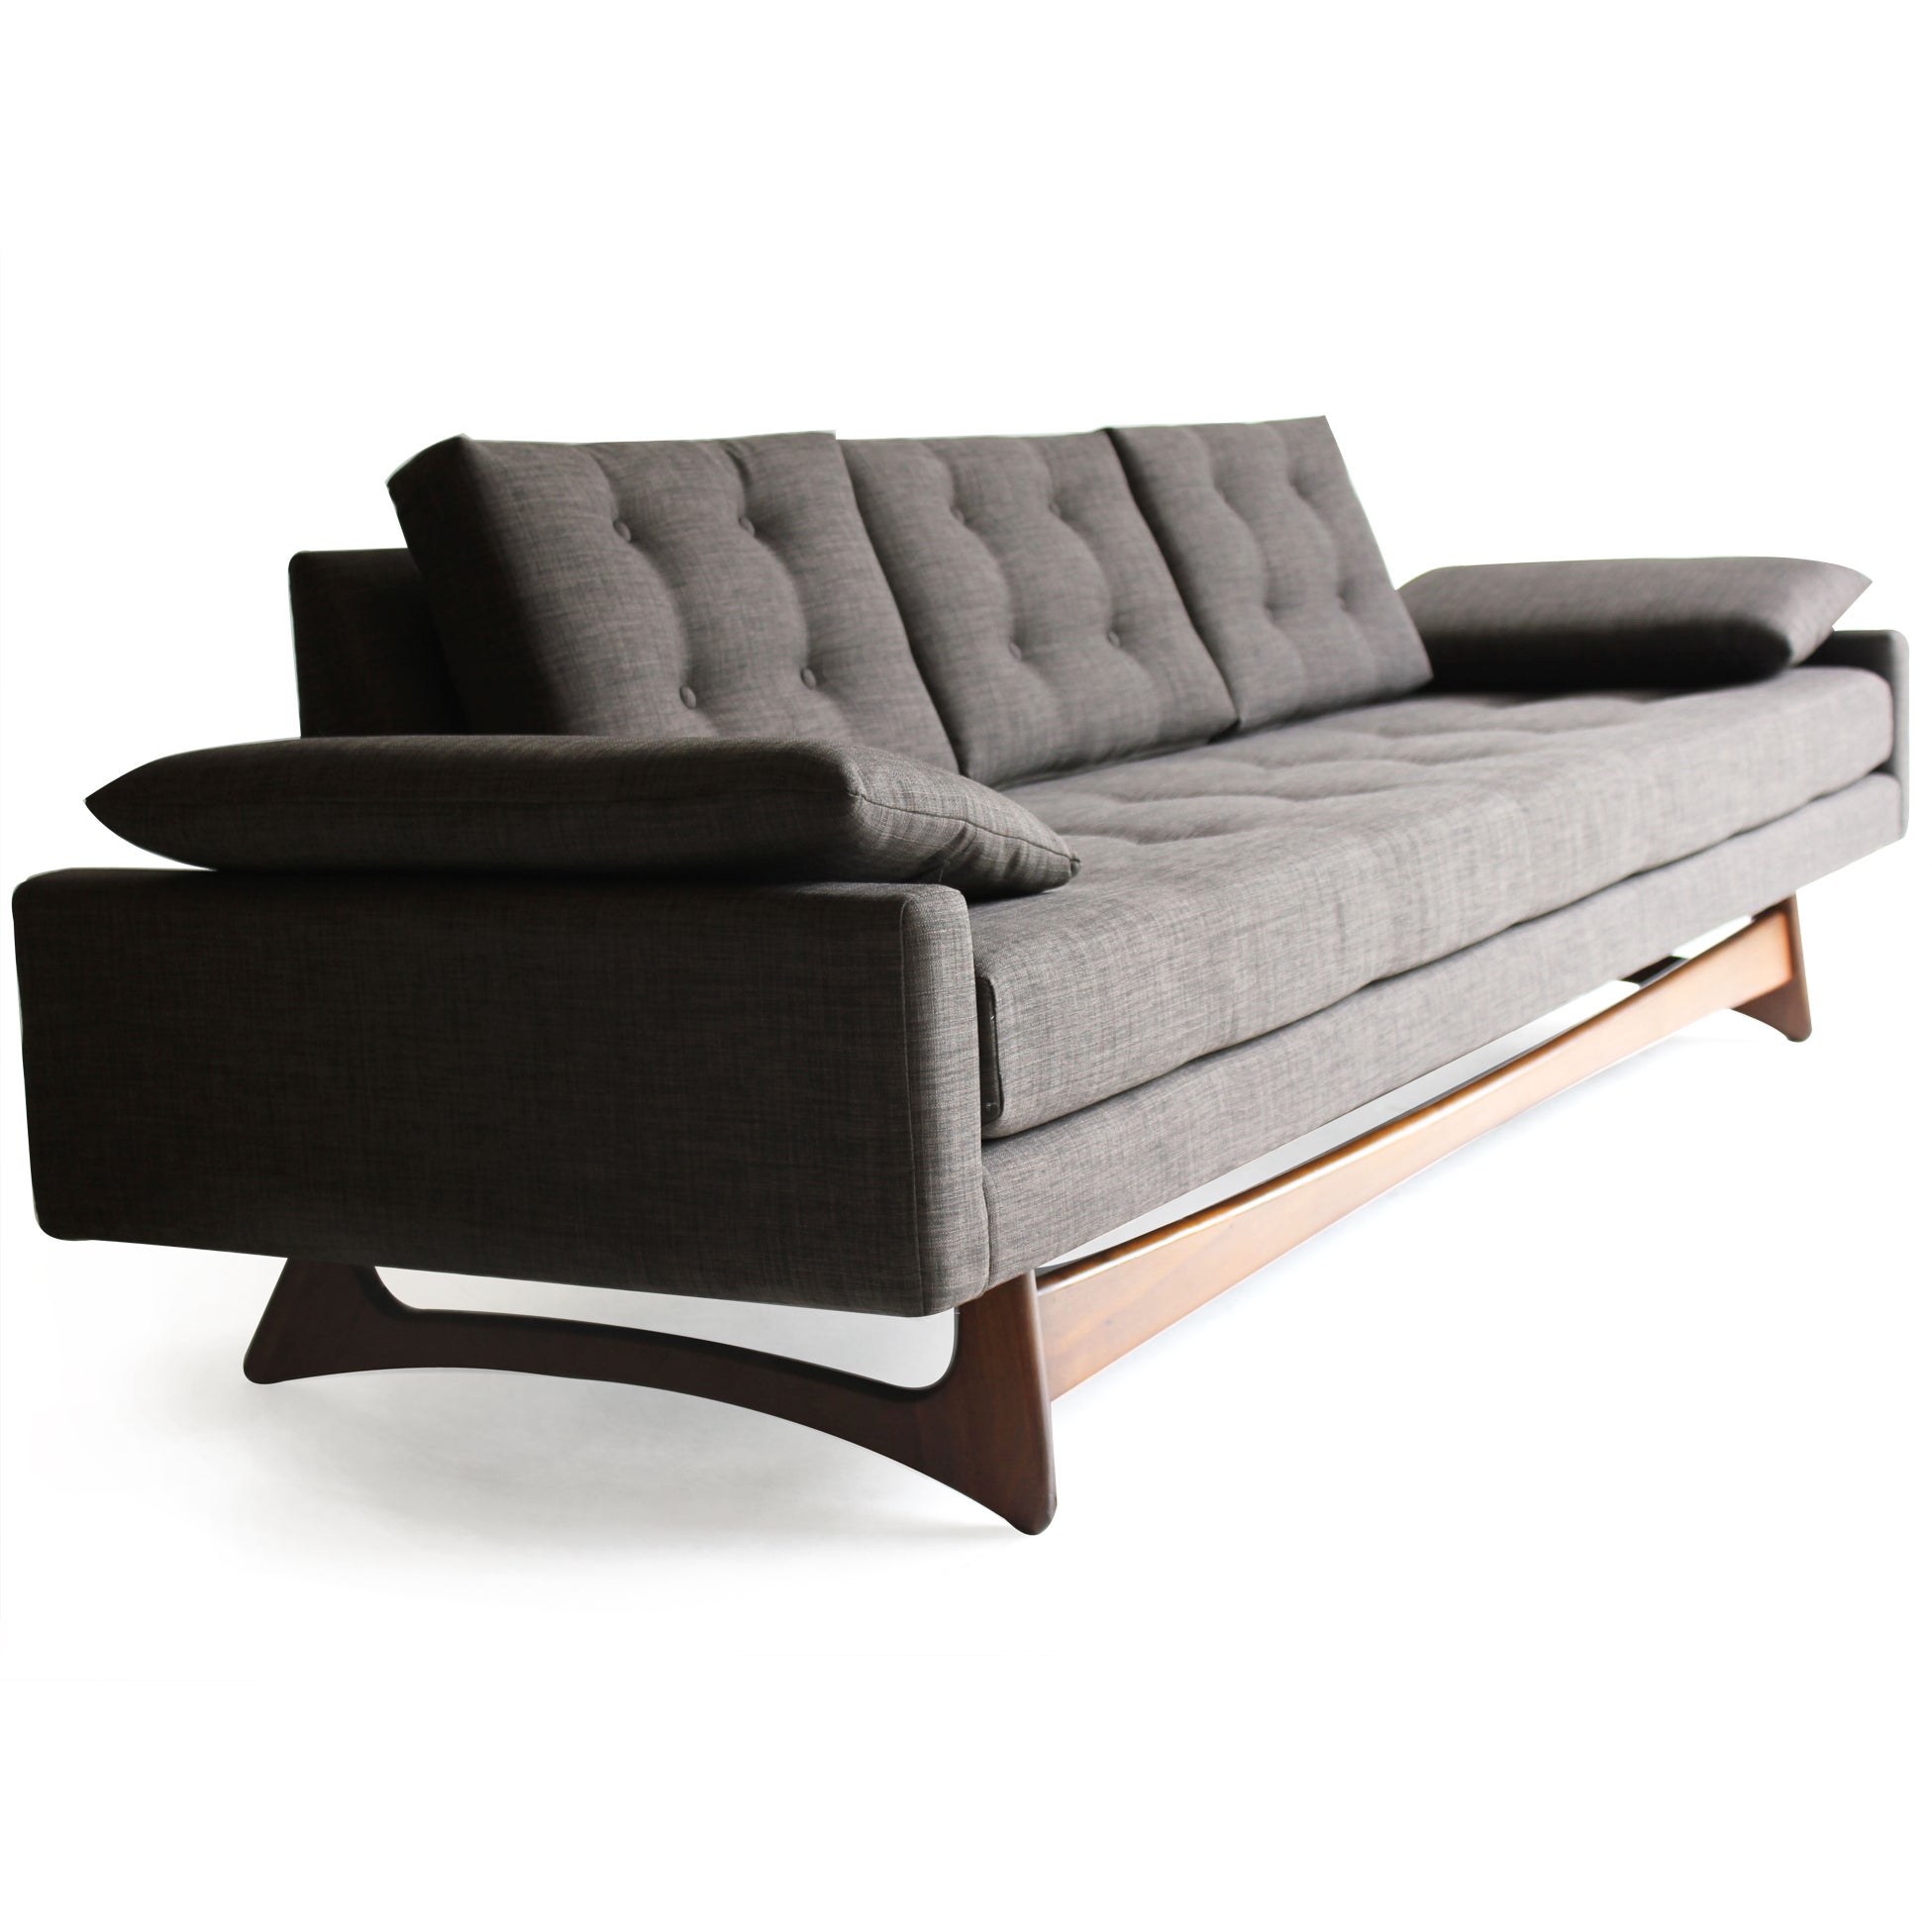 Adrian Pearsall Sofa - Couch 2408-S for Craft Associates